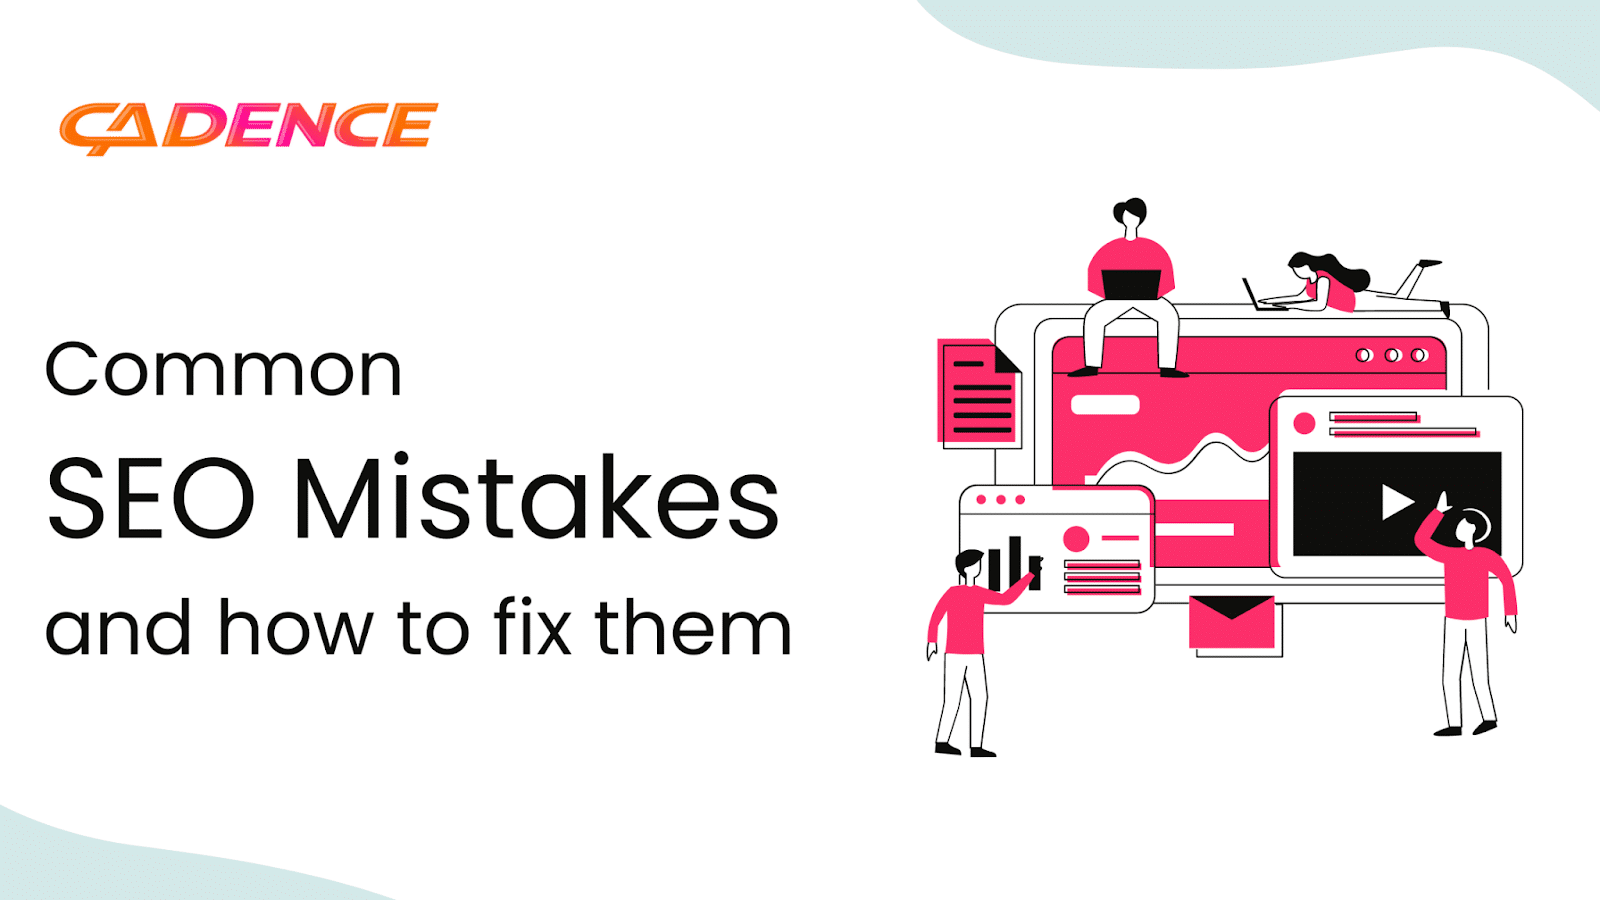 Common SEO Mistakes & How to Fix Them